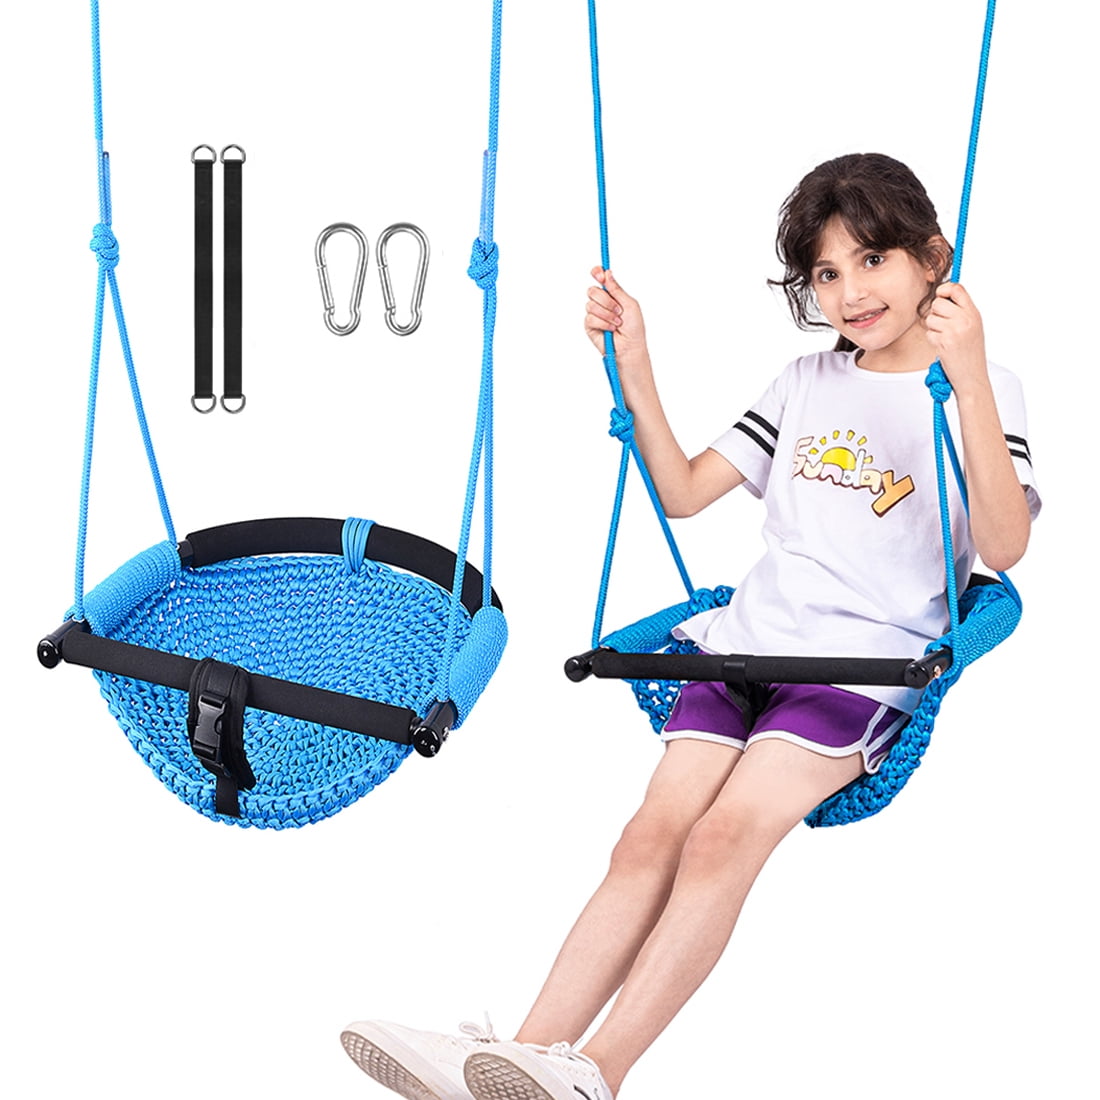 Swing Seat Safety Secure Hanging Adult Kids Outdoor/Indoor Play w/2 Chains 